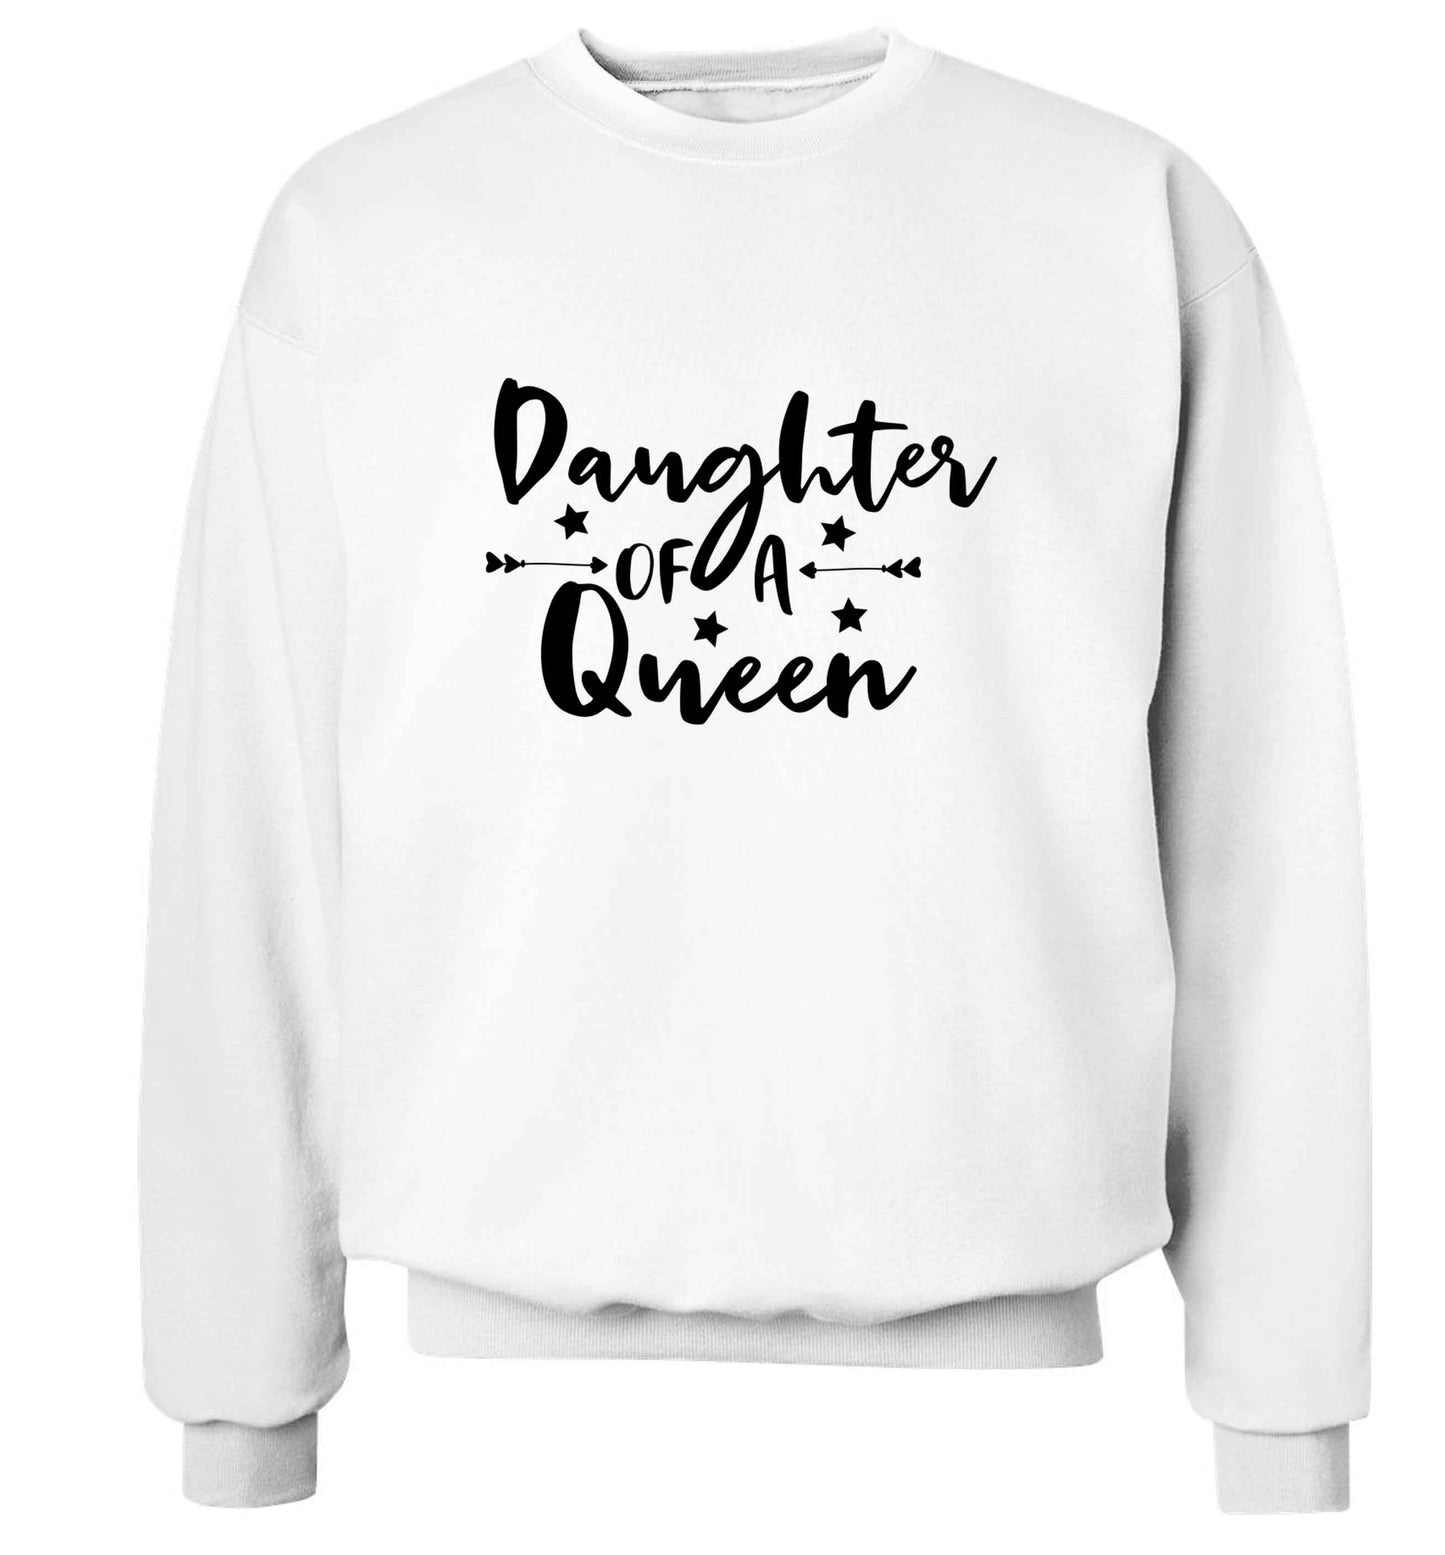 Daughter of a Queen adult's unisex white sweater 2XL